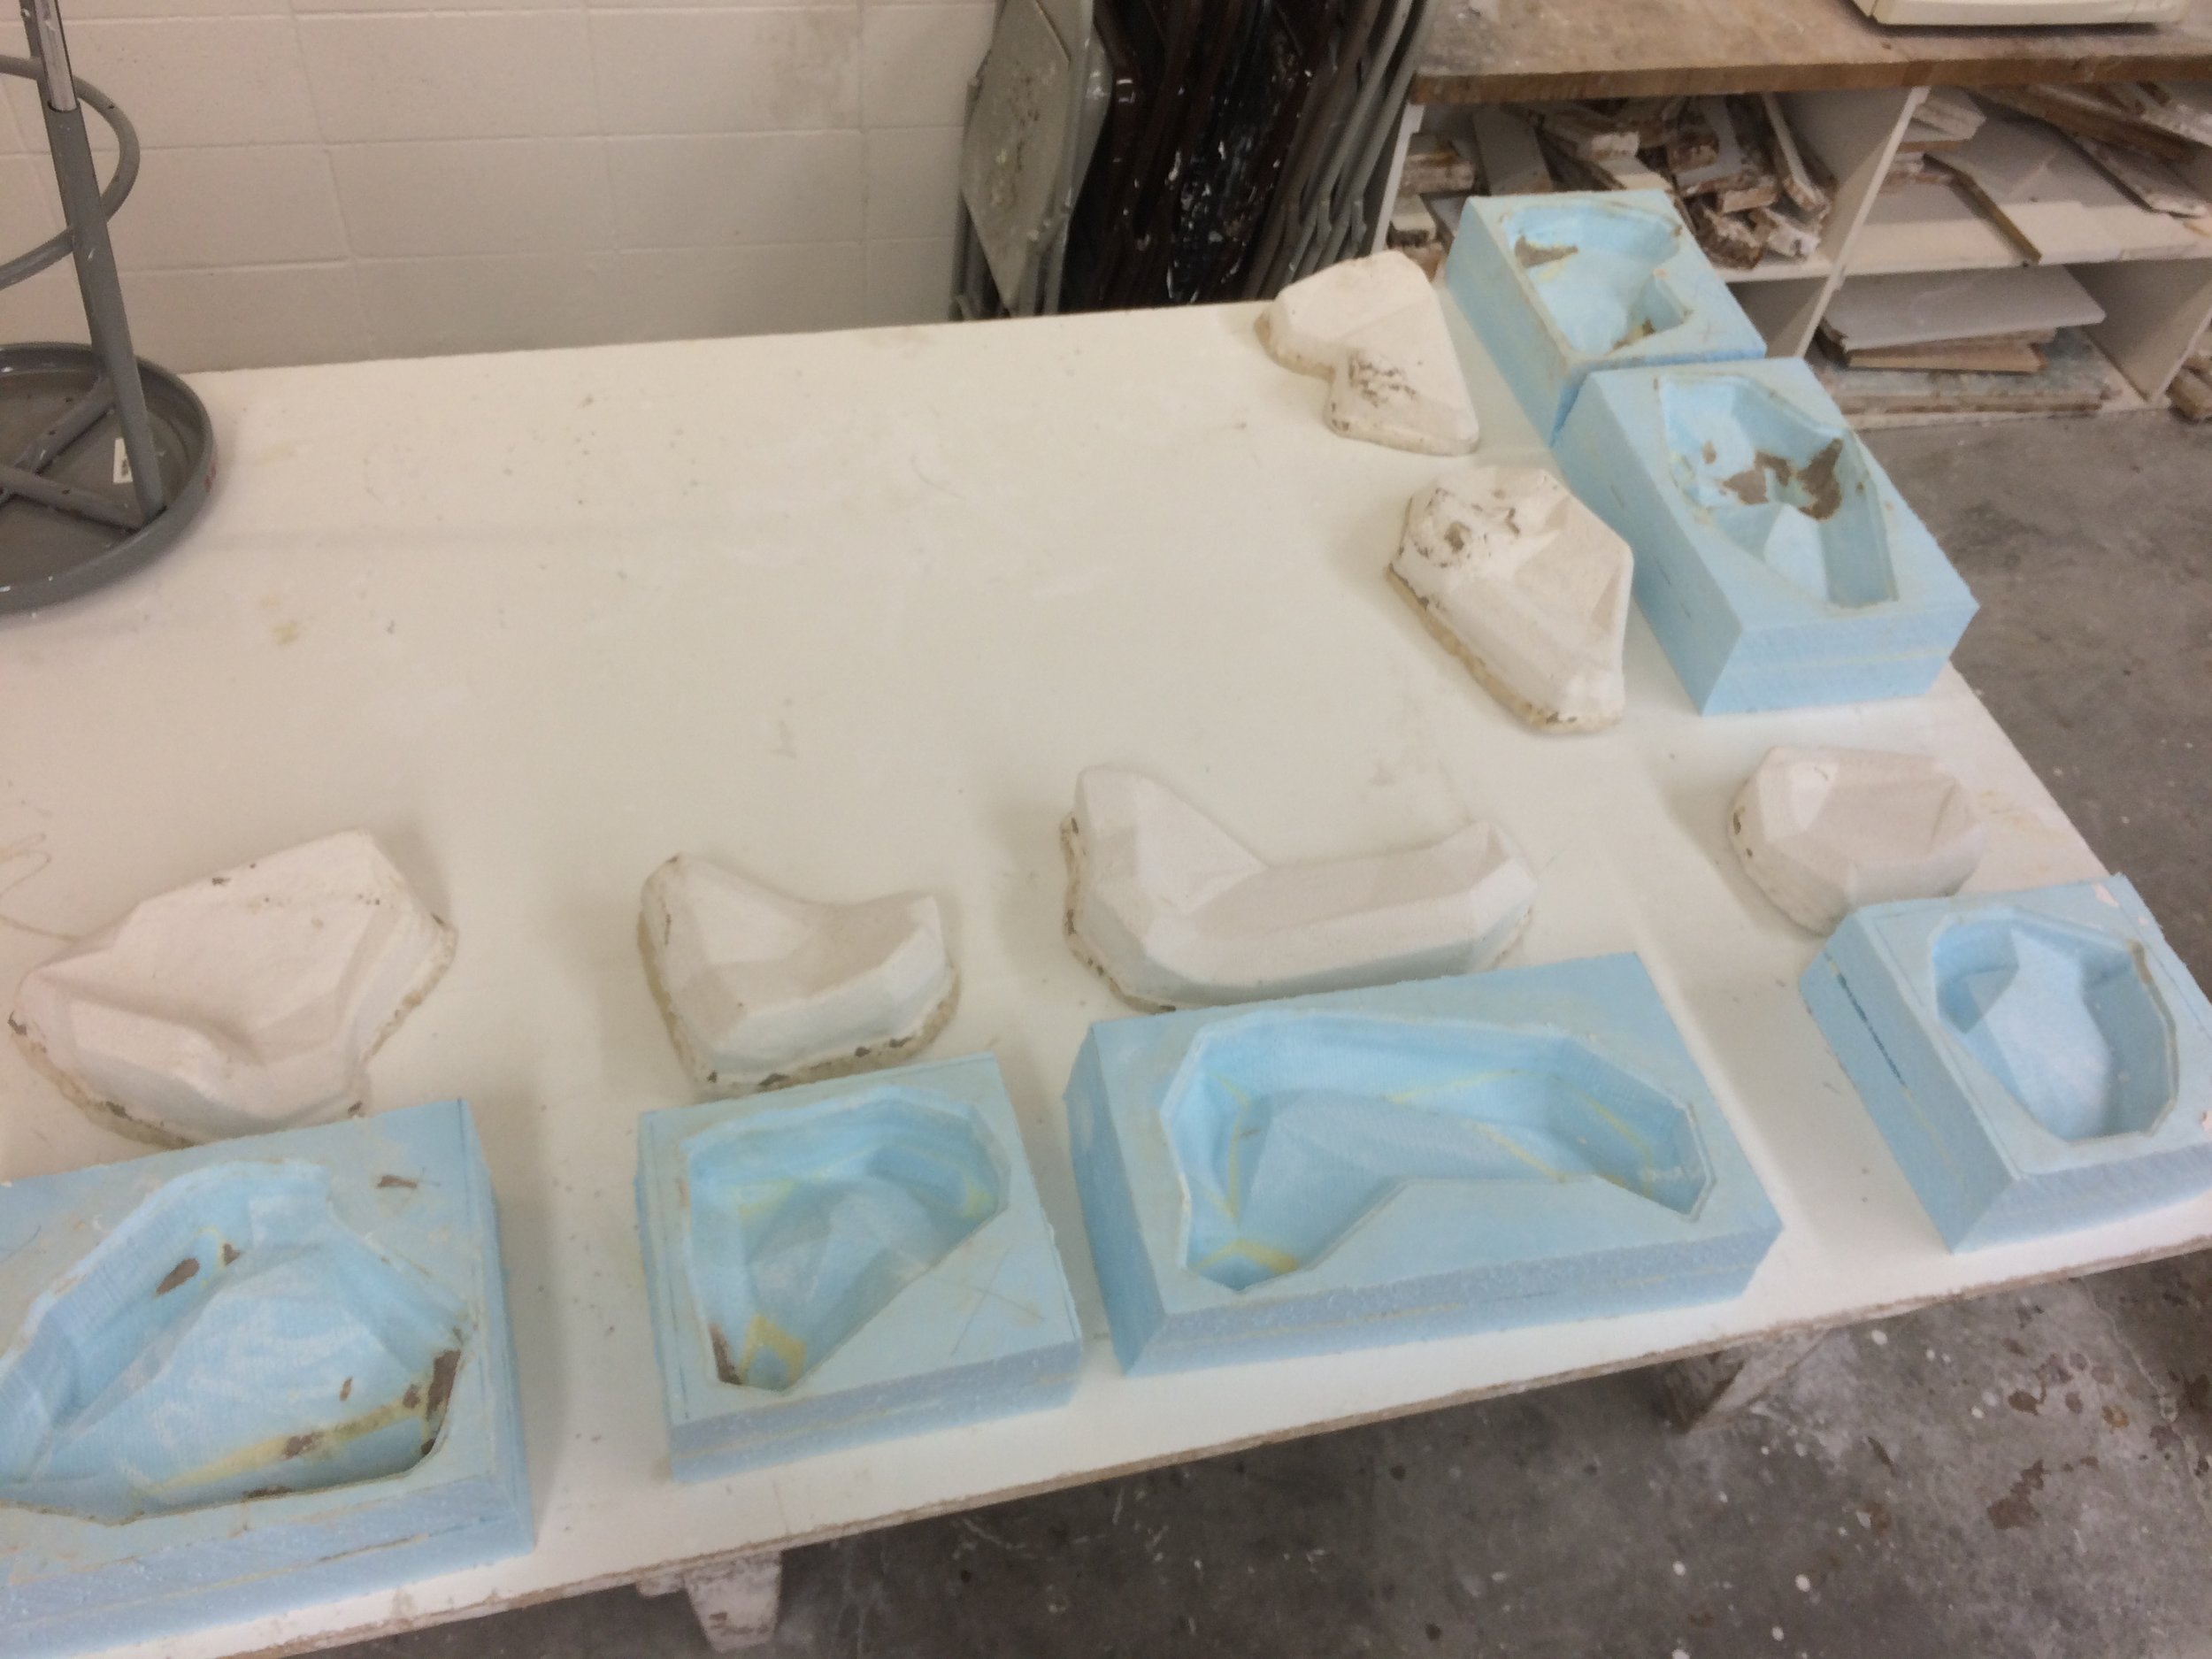   6 part mold: The mold positives were first milled in foam, which were then used to create plaster mold negatives  